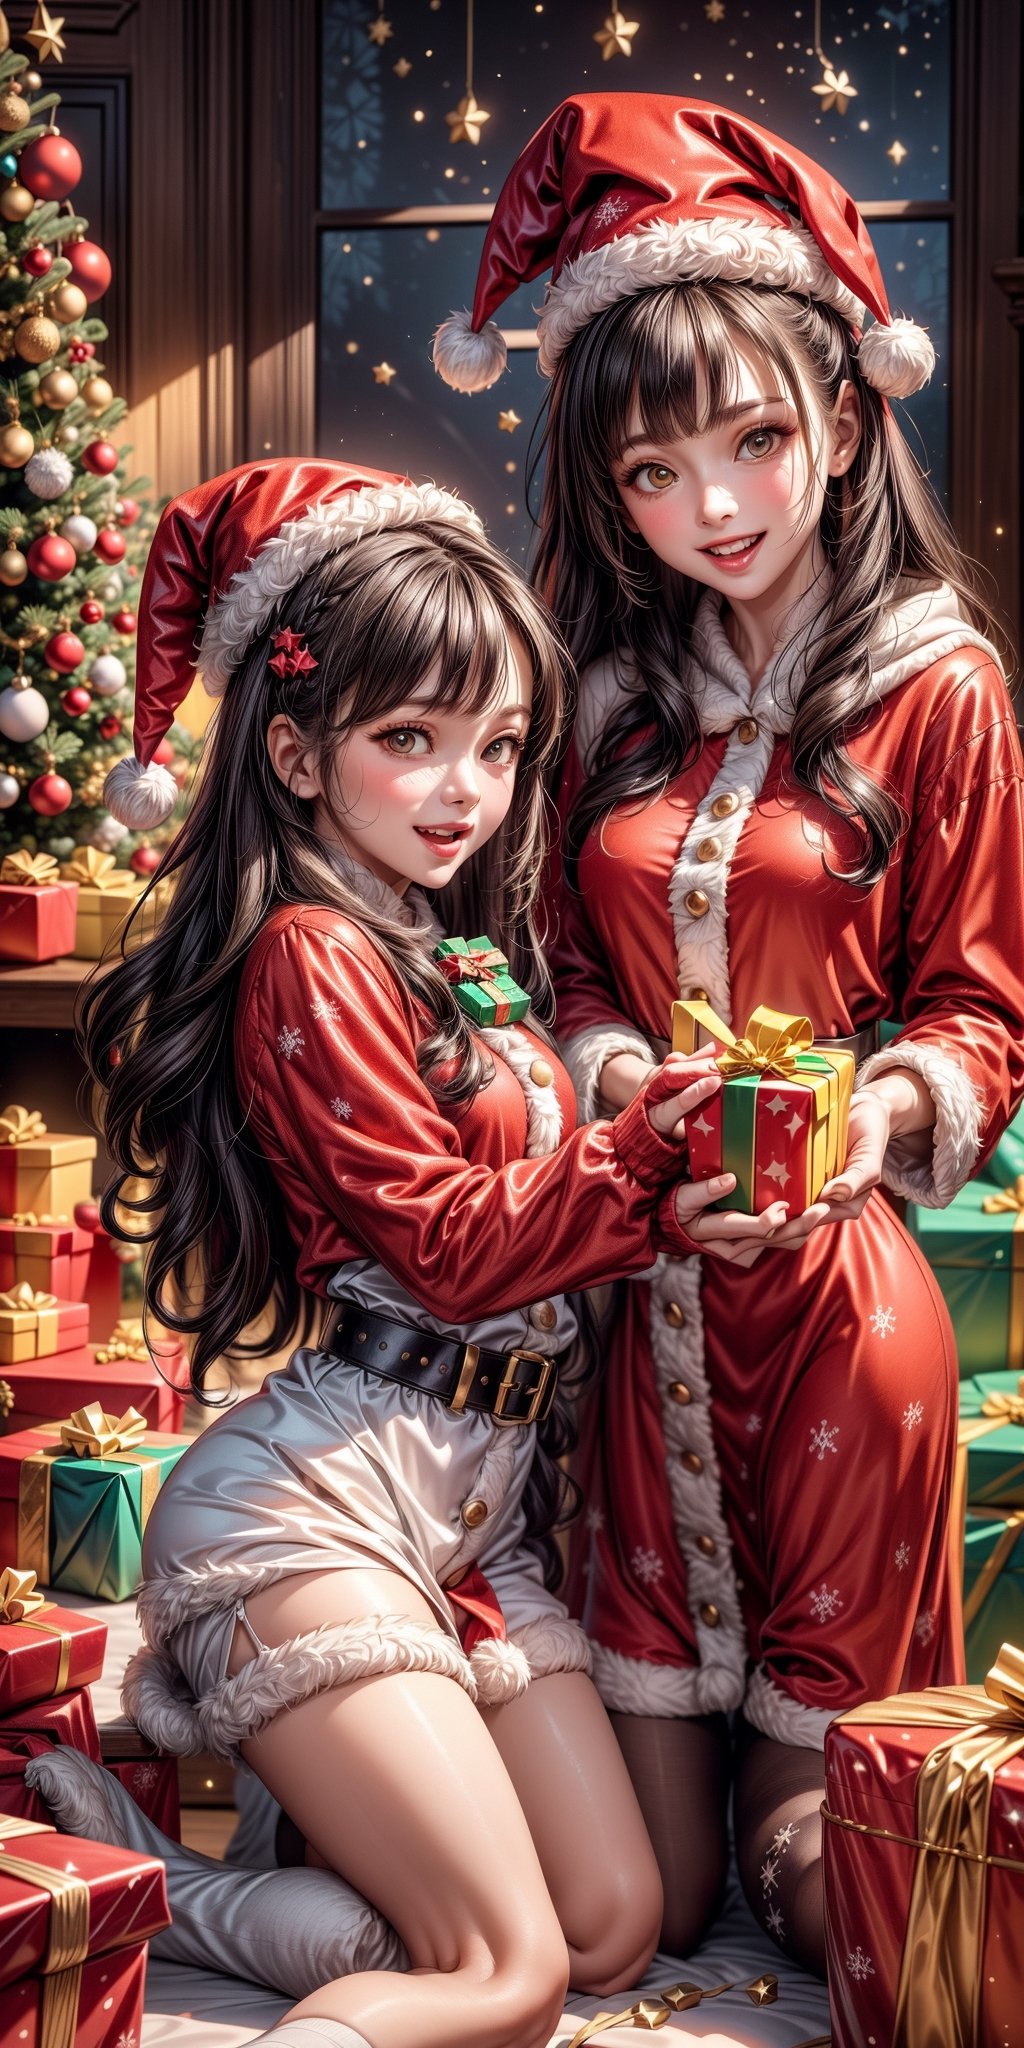 (very beautiful british child), (beautiful smile), (loli_child_small_little:1.5), (of course on the face), navel,  (Red and white Santa Claus costume for girl, dress, hat, belt, hooded cape and a pair of gloves. The long dress is designed with long sleeves, white plush trim, high waist and white plush trim, which is full of Christmas atmosphere:1.7), (smiling:1.3), thin waist, wide pelvis, athletic body, slim body, hourglass figure, perfect hands, pretty eyes, pretty face, very long hair, living room by the fireplace background,

(Imagine a dynamic scene with two happy and fun girls, playing "Gift Wrapping Challenge":1.9). You can see a lit fireplace, a very beautiful white cat sleeping near it. a very beautiful and colorful Christmas tree with many decorations, a small manger next to it.
Choose a background that complements your character, creating a cinematic masterpiece with high realism and top-notch image quality. 

PNG image format, sharp lines and edges, solid blocks of colors, 300+ dpi dots per inch, 16k ultra high definition, photorealistic: 1.5, photography, masterpiece, realistic, realism, photorealism, high contrast, digital art trending on Artstation ultra high definition. realistic detailed, detailed, skin texture, hyper detailed, realistic skin texture, facial features, best quality, ultra high resolution, high resolution, detailed, raw photo, sharpness, rich lens colors, hyper realistic realistic texture, lighting dramatic, unrealistic motor tendencies, ultra sharp, intricate details, vibrant colors, perfect feet, sexy legs, perfect hands, sexy arms, highly detailed skin, textured skin, defined body features, detailed shadows, narrow waist , big hips, aesthetic, blush, front view ,Santa Claus,Christmas